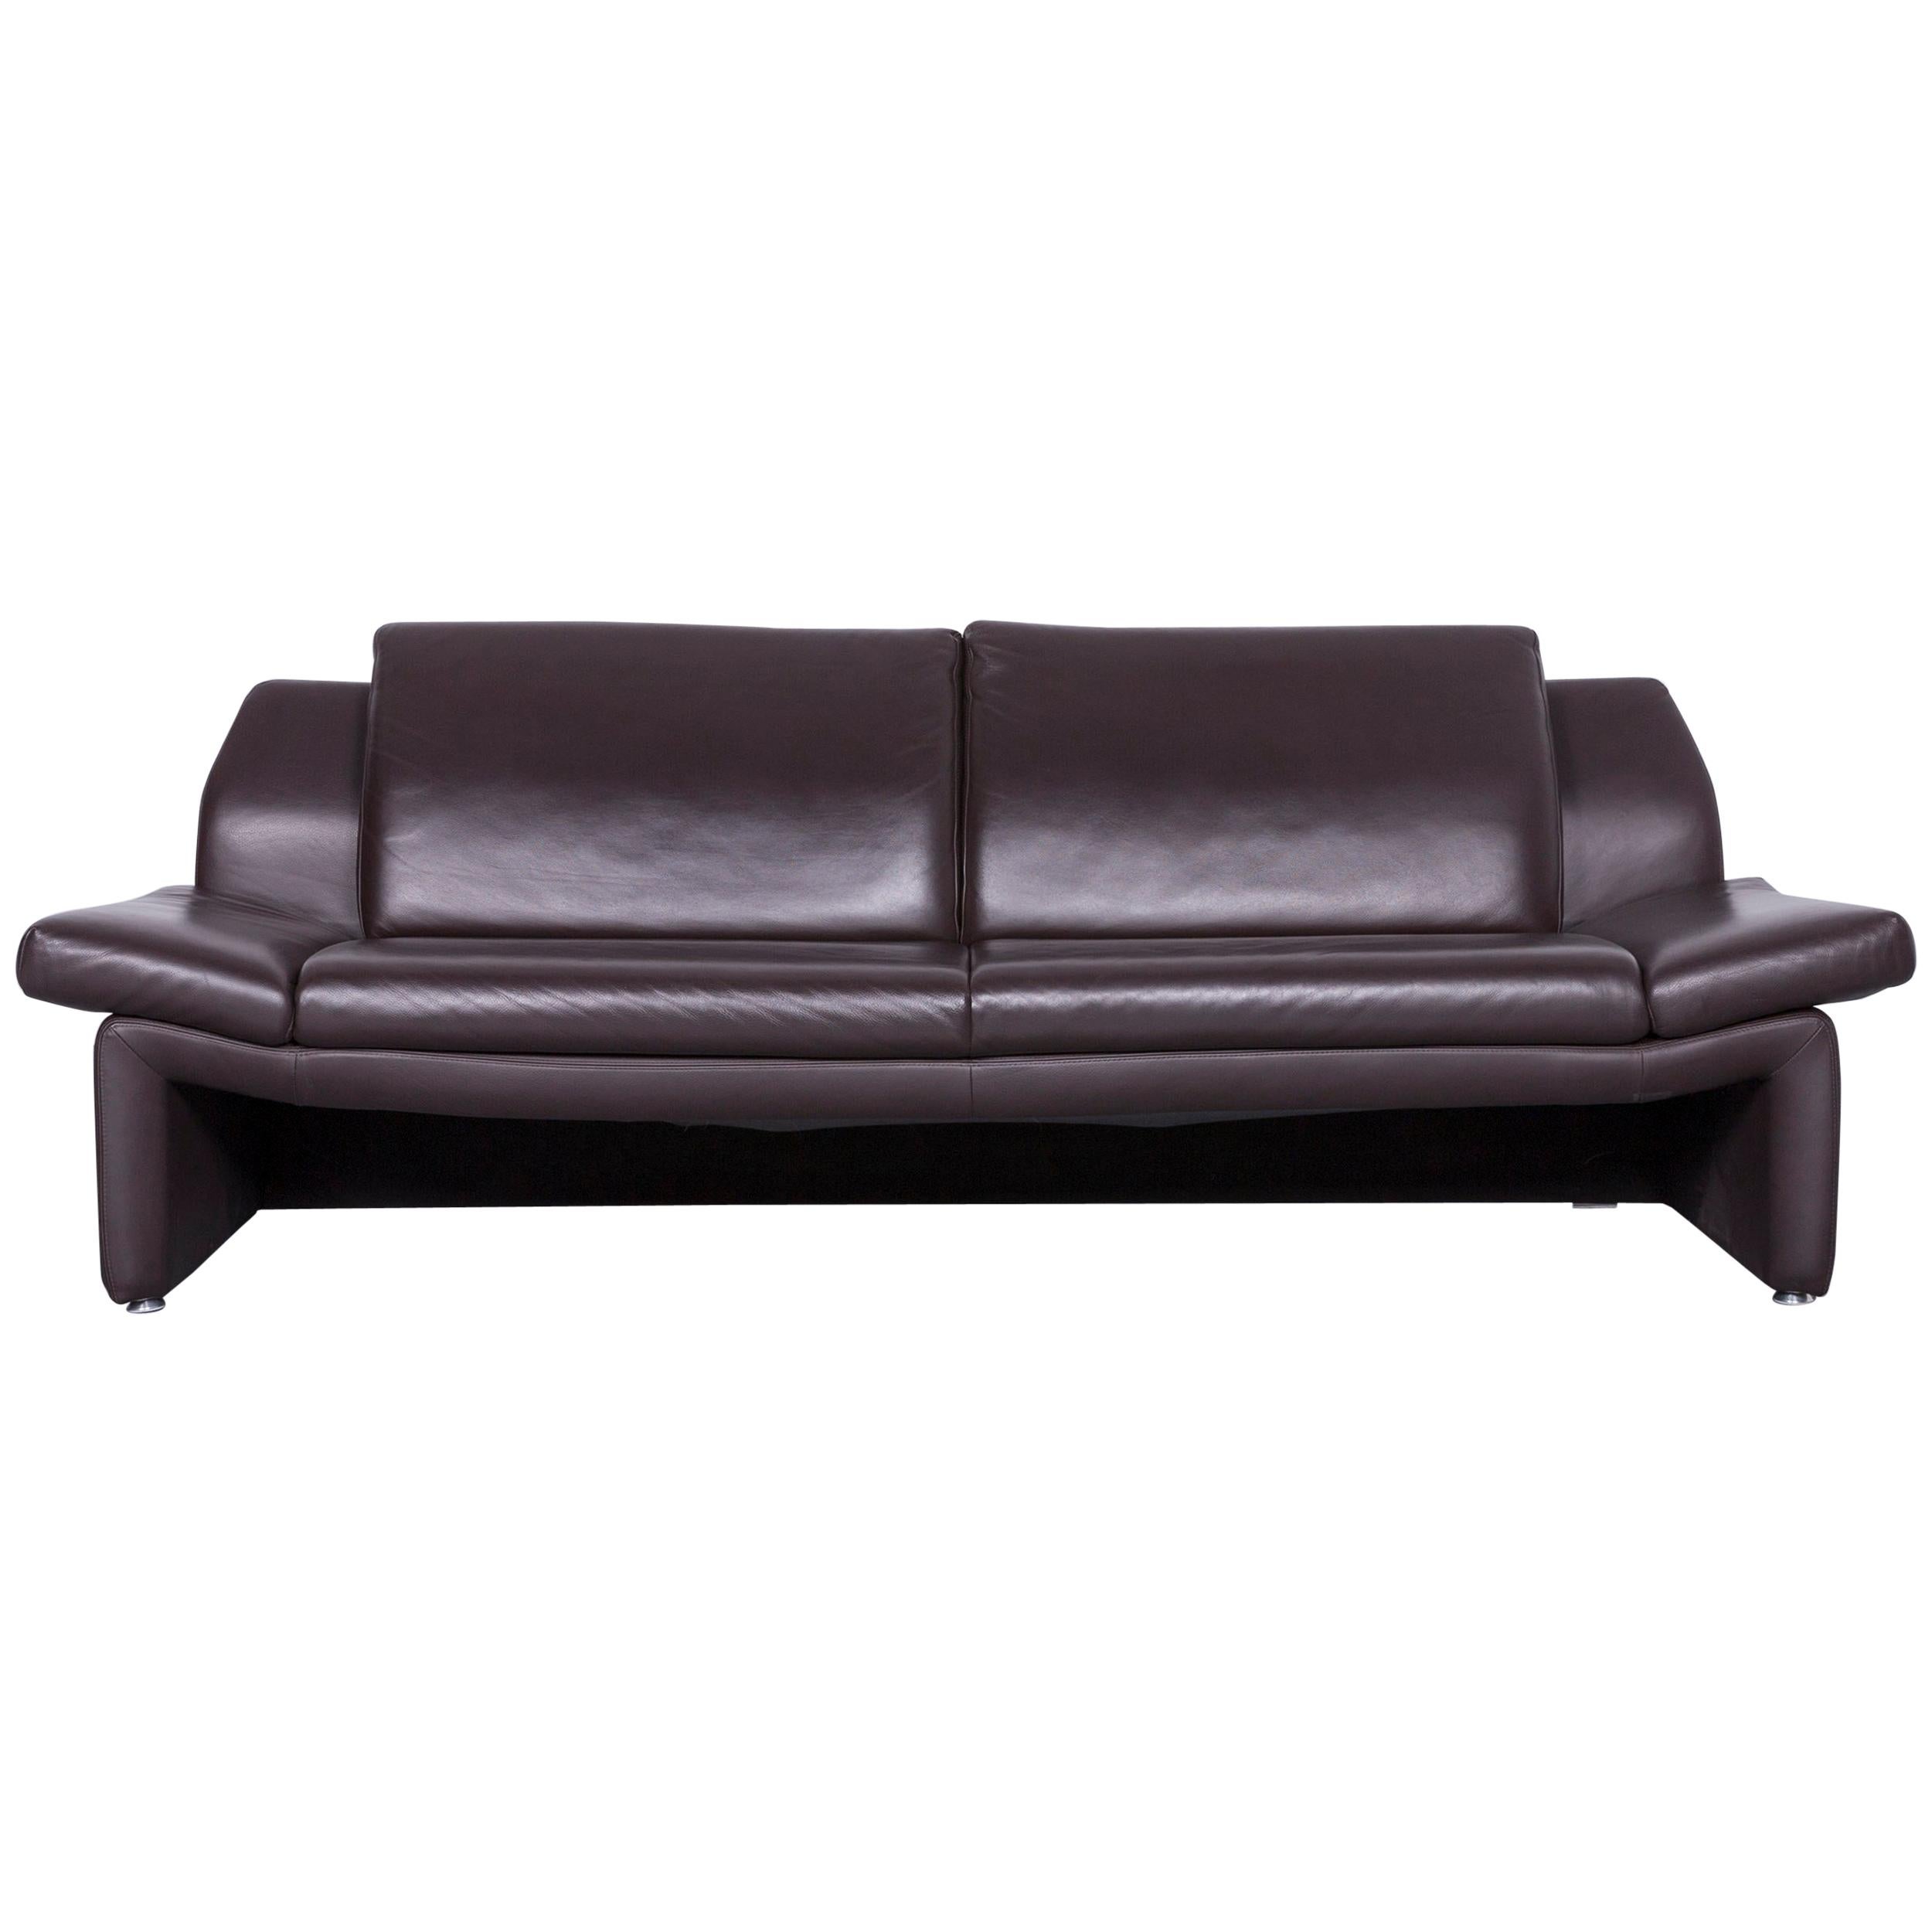 Laauser Designer Leather Sofa Brown Three-Seat Couch For Sale